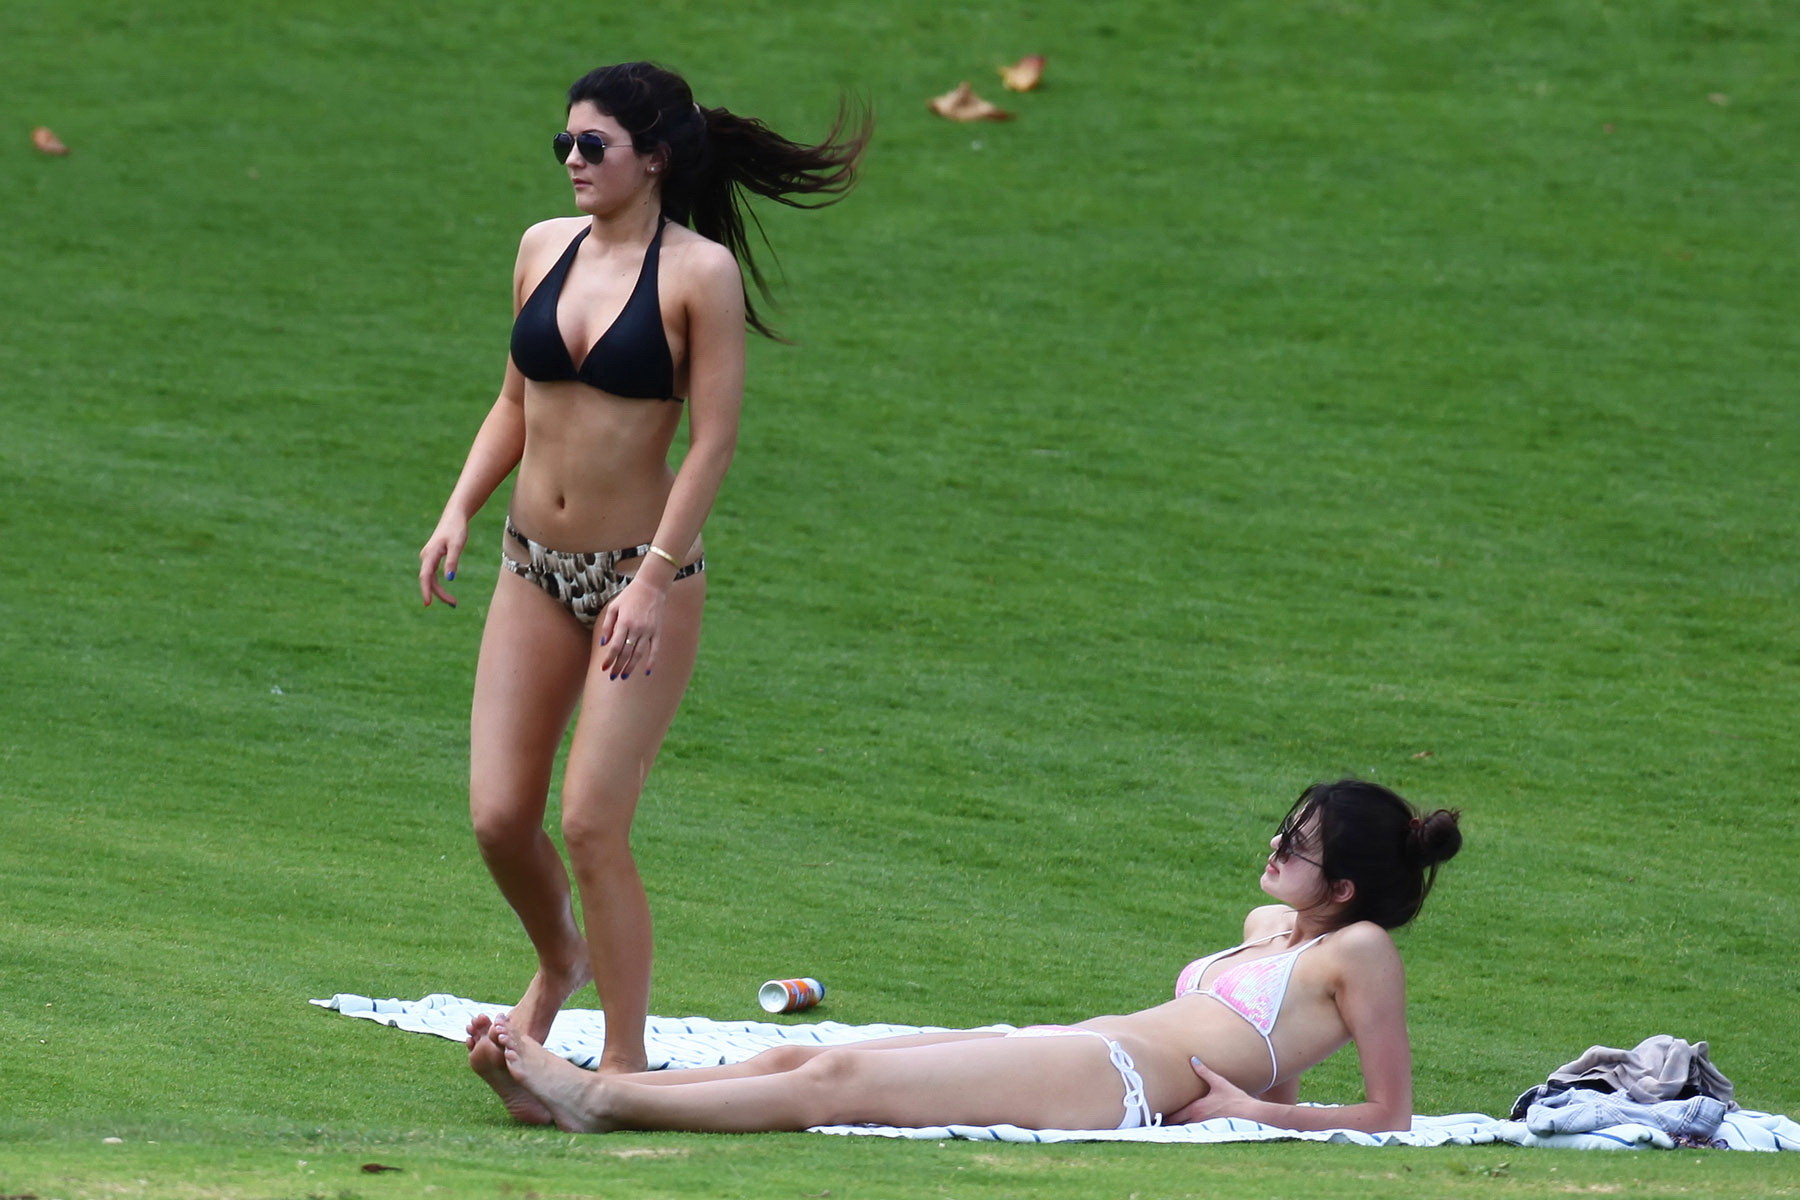 Kylie and Kendall Jenner tanning their hot bodies in skimpy bikini sets on a mea #75174058